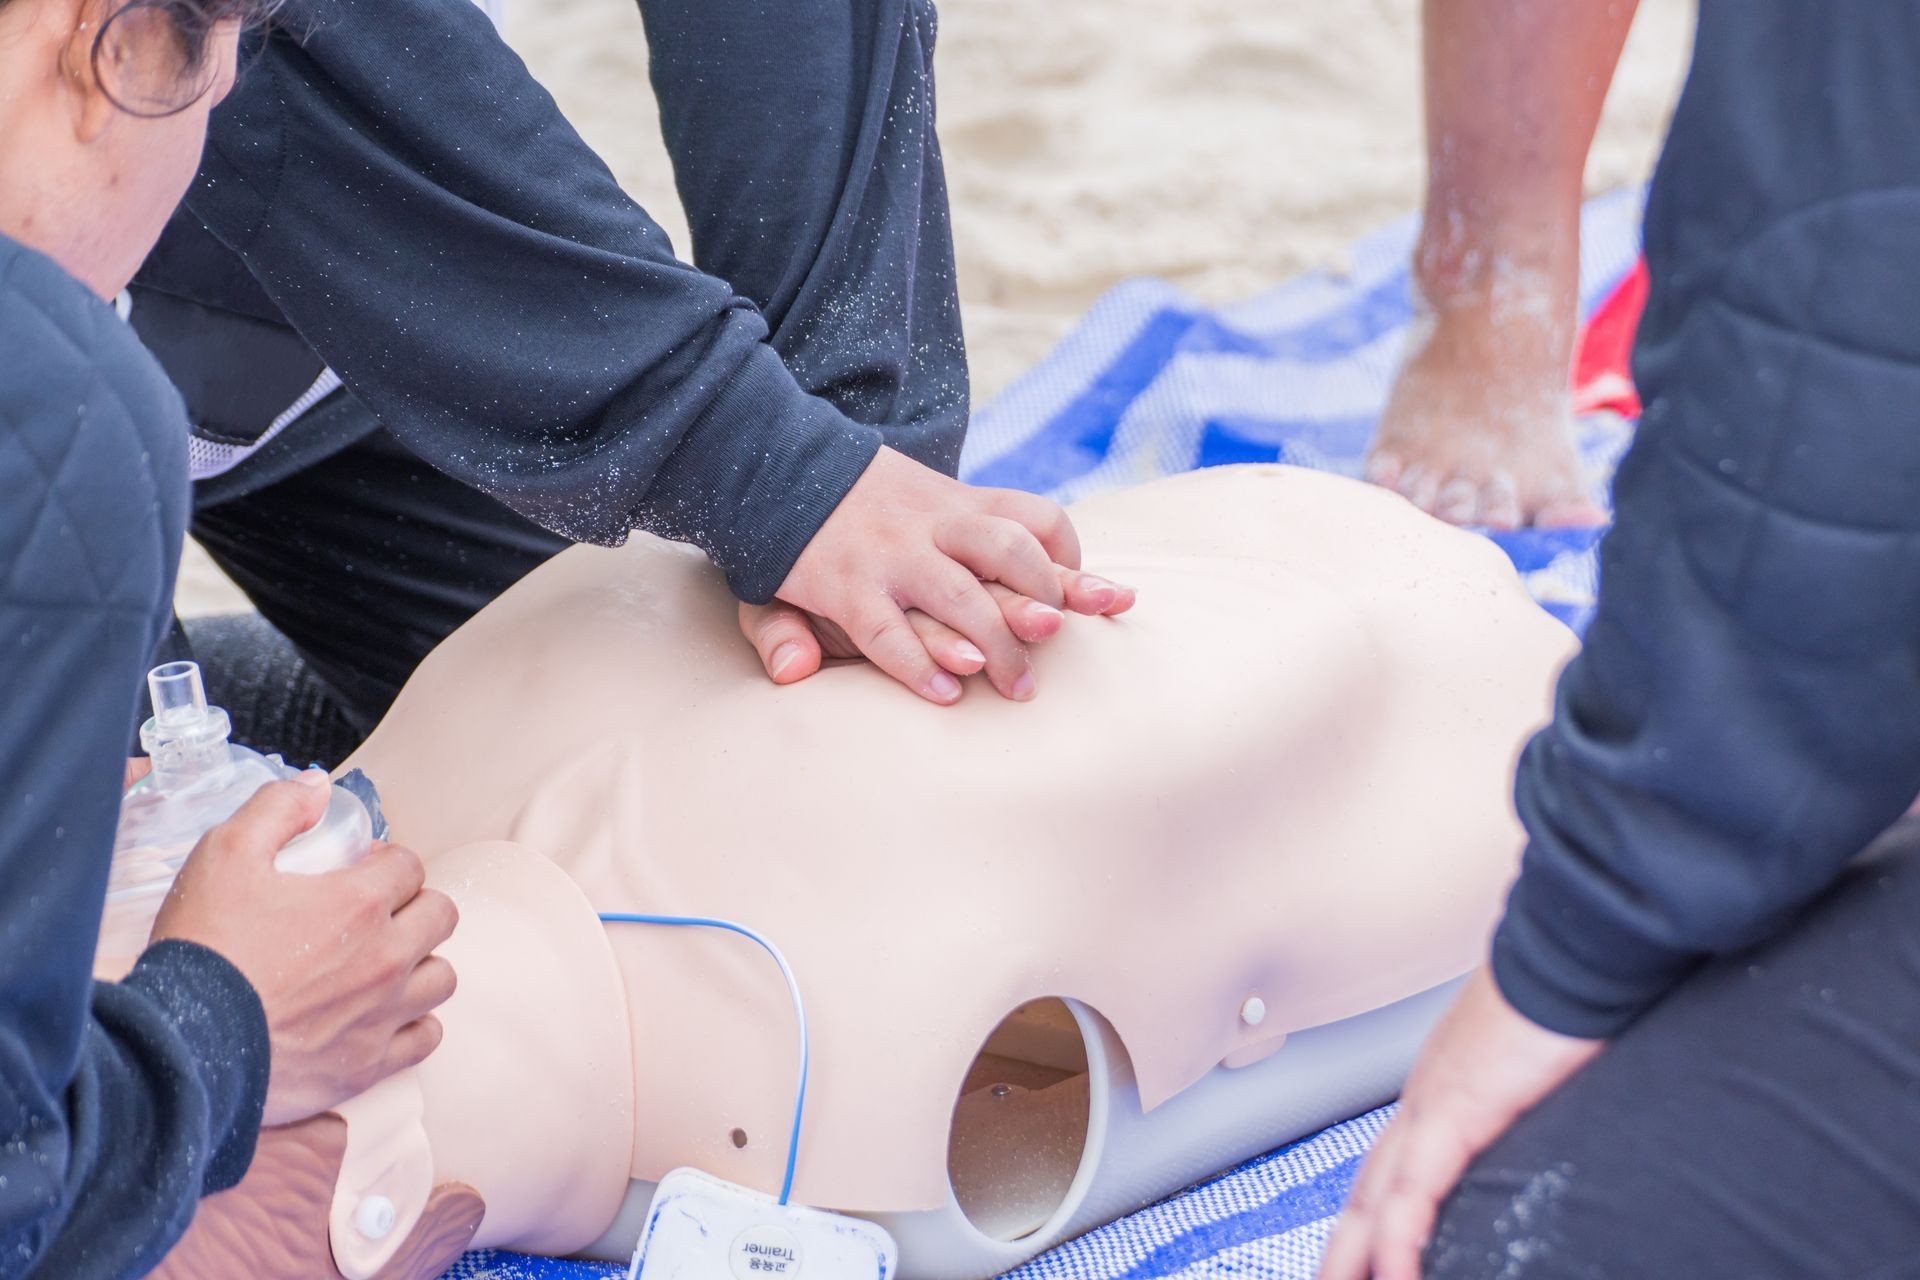 First Aid CPR & AED